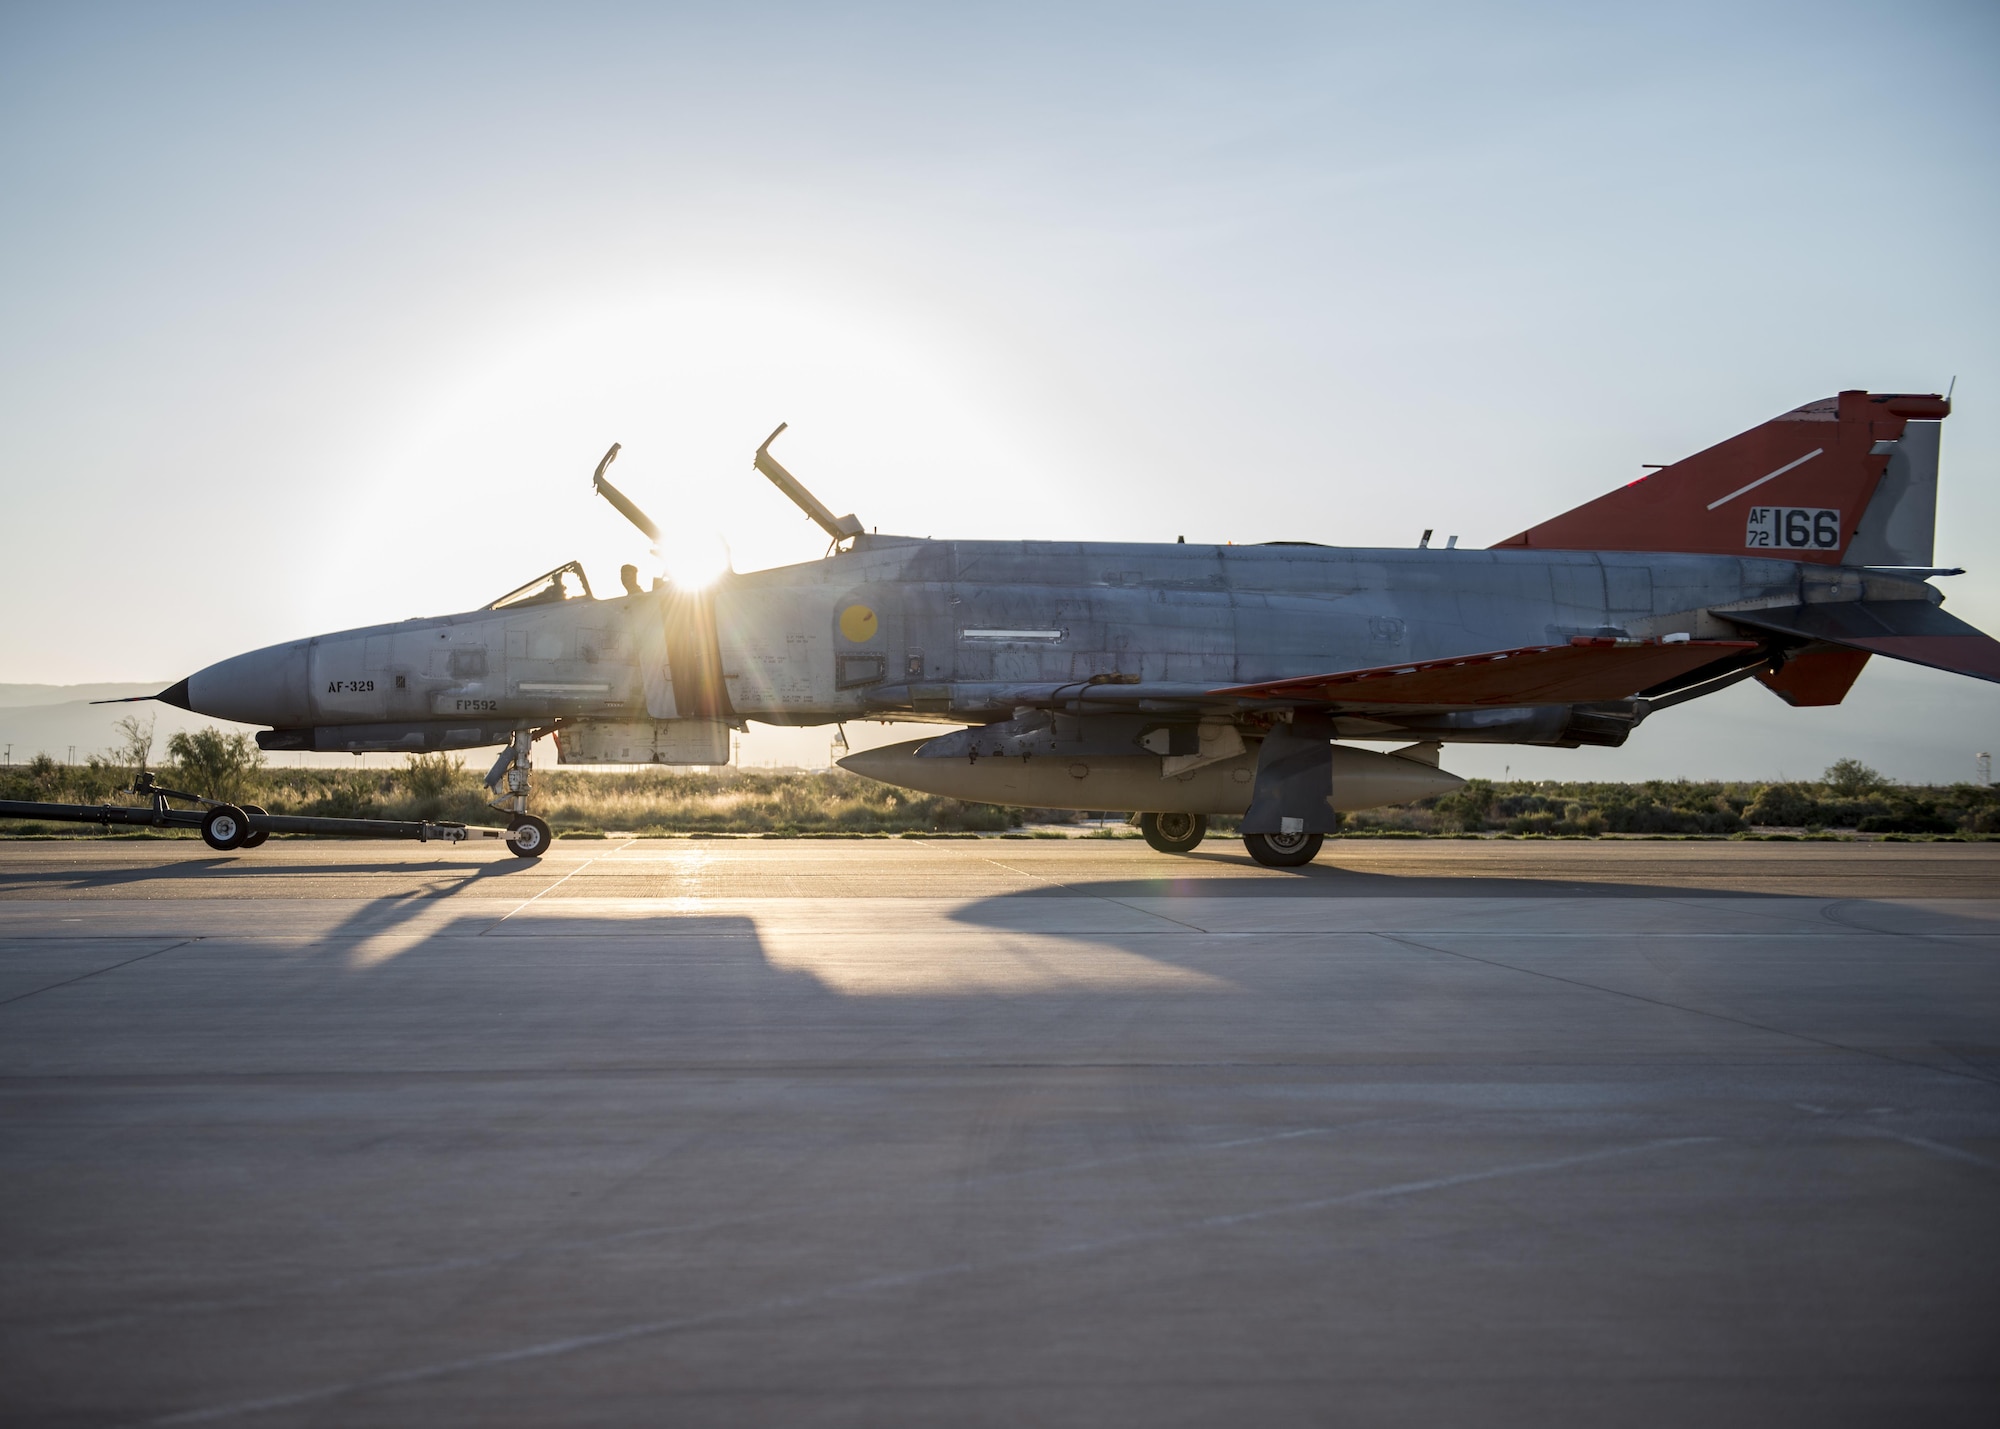 A QF-4 Phantom sits on the flight line before its final unmanned mission at Holloman Air Force Base, N.M. on Aug. 17. During its final mission, the QF-4 served its primary function as an aerial target and was shot at by an F-35 Lightning II from Edwards Air Force Base, Calif. (U.S. Air Force photo by Airman 1st Class Randahl J. Jenson)